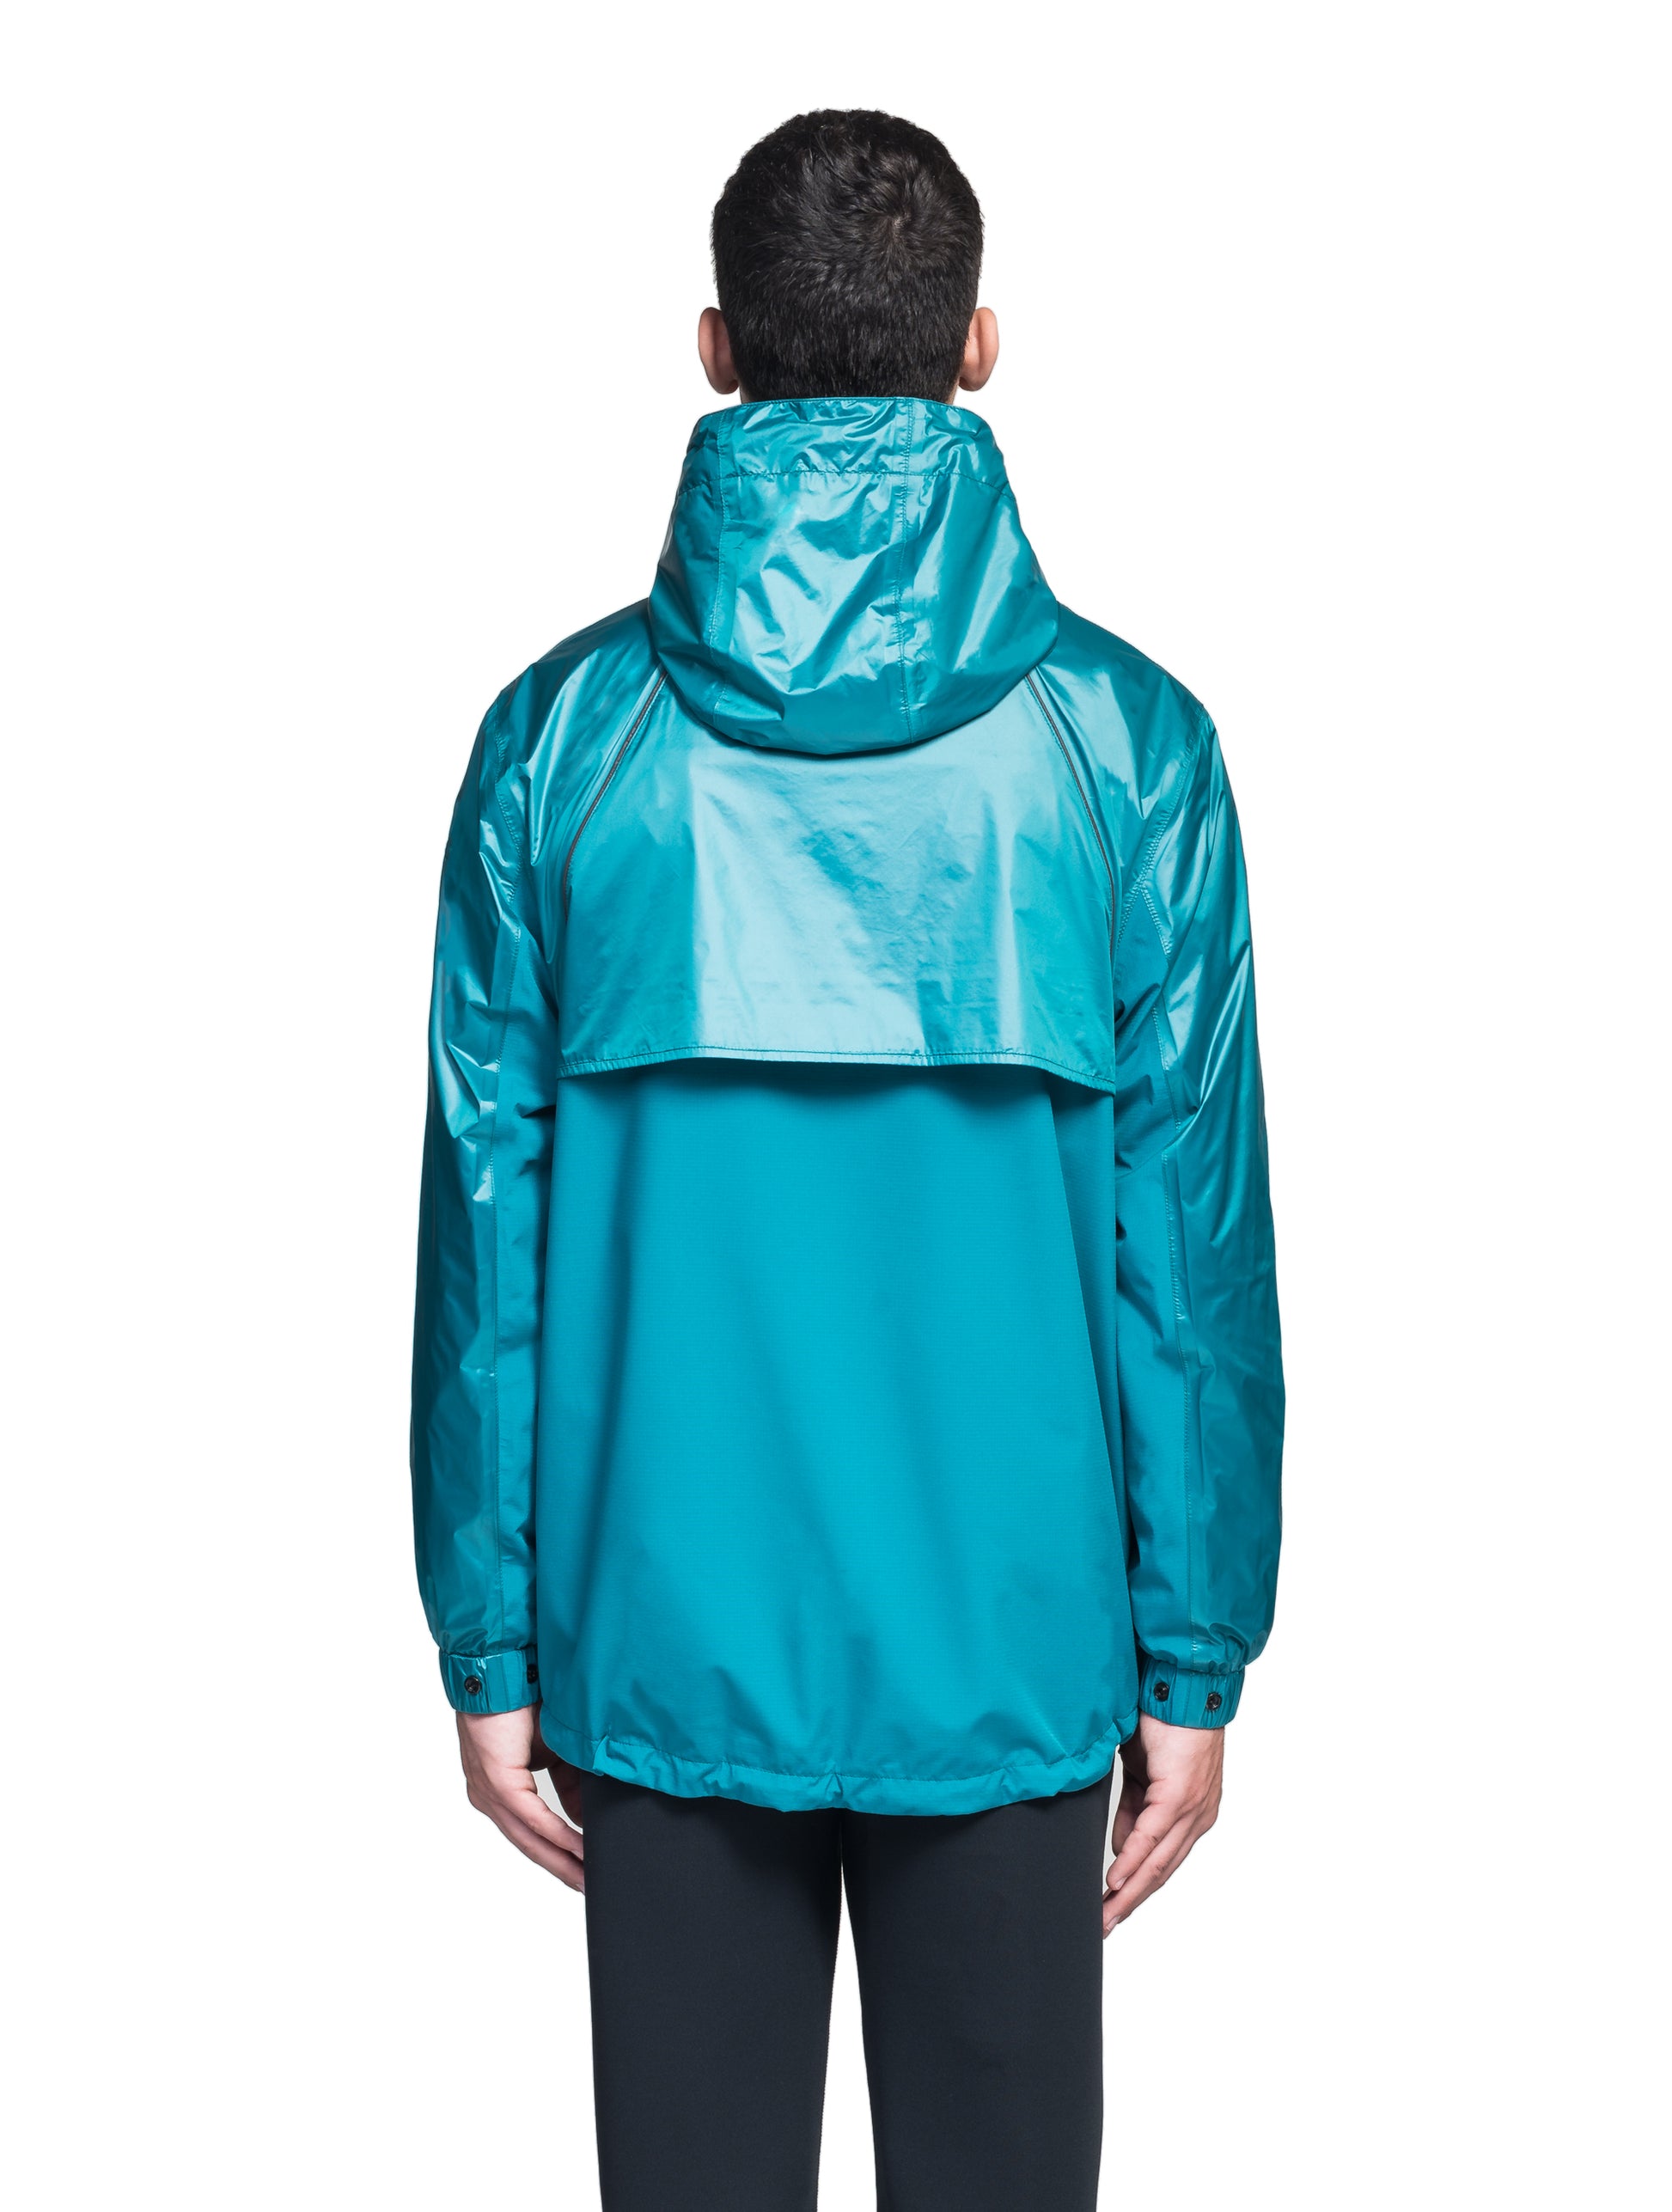 Stratus Men's Tailored Packable Rain Jacket in hip length, premium cire technical nylon taffeta and stretch ripstop fabrication, highly breathable mesh lining, hidden packable pocket, non-removable hood with adjustable draw cord, reflective piping along front and back, underarm grommets for extra breathability, back yoke with mesh ventilation, two waist zipper pockets, two interior zipper pockets, elastic cuffs with adjustable snap button, and adjustable interior draw cord at waist hem, in Deep Lake